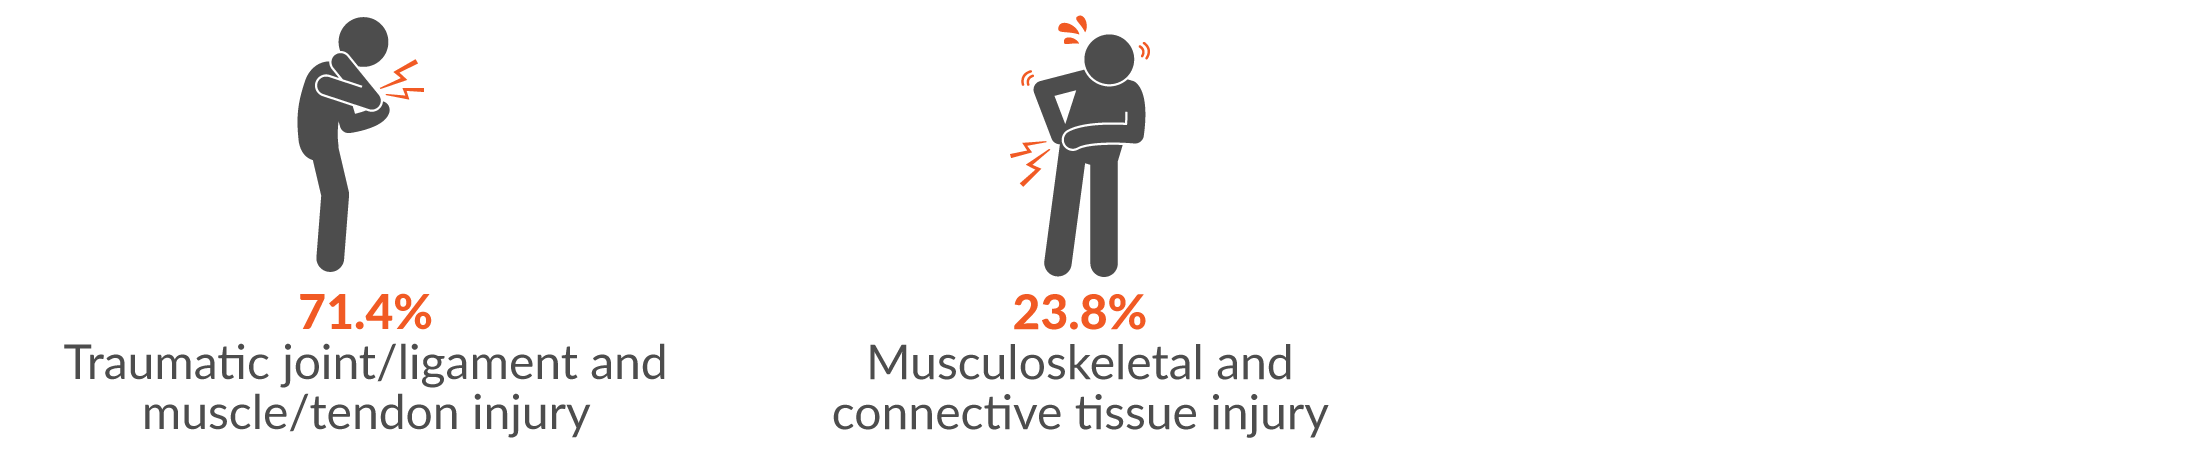 71.4% traumatic joint/ligament and muscle/tendon injury and 23.8% musculoskeletal and connective tissue injury.